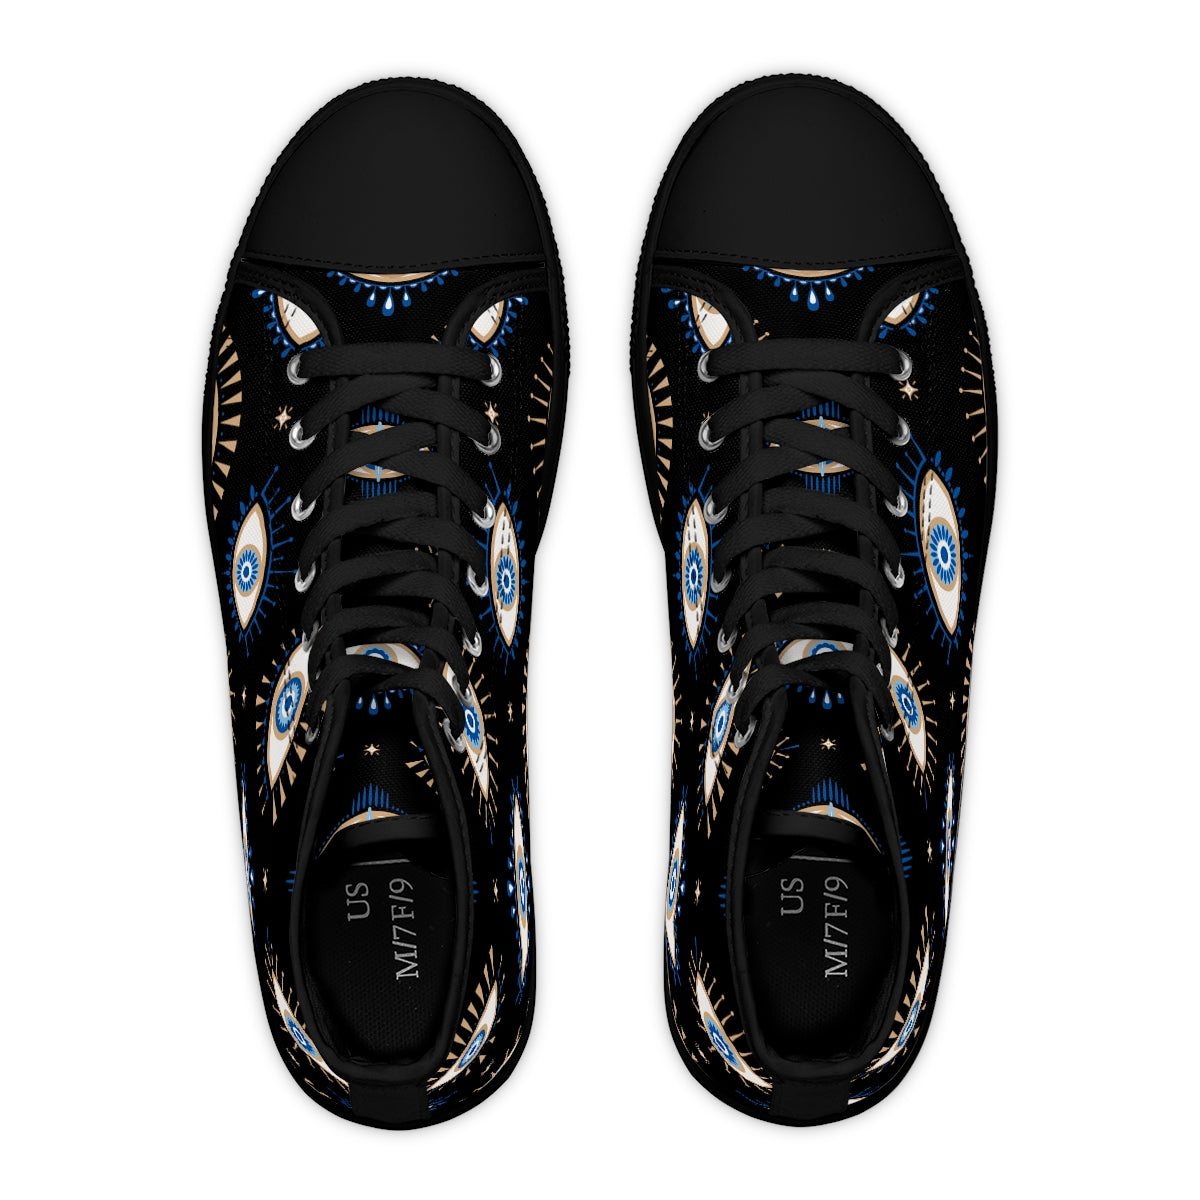 Blue and Black "Evil Eye" Women's High Top Sneakers